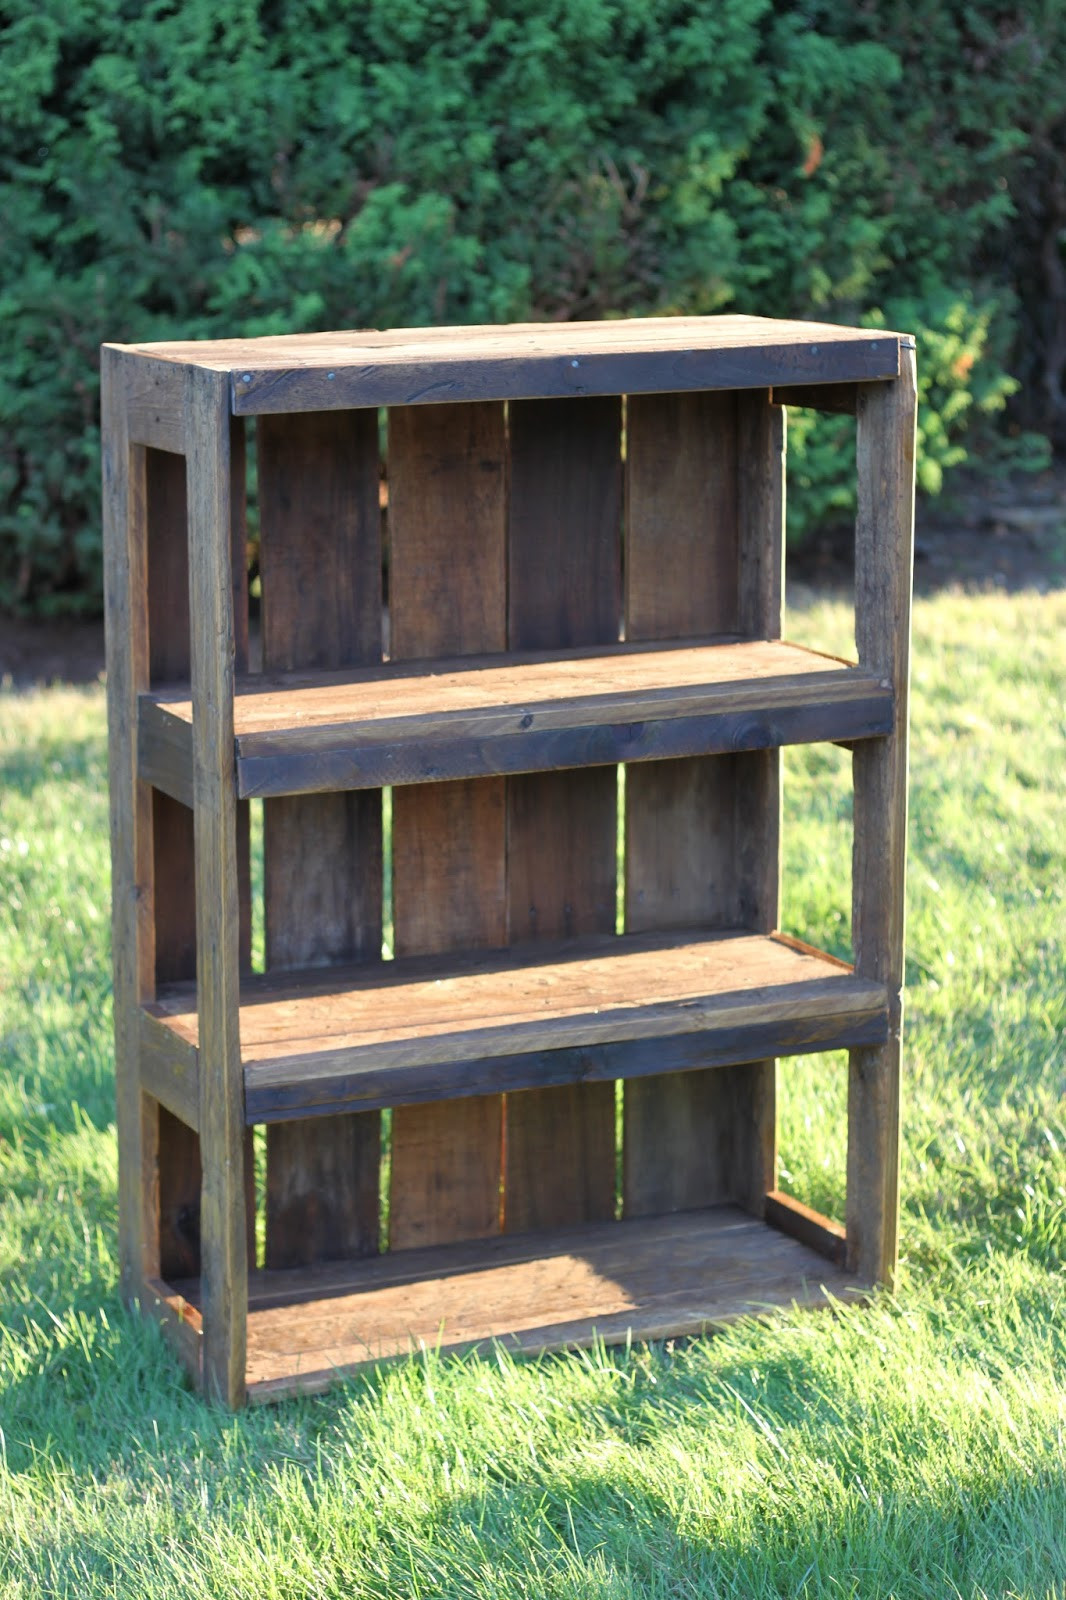 DIY Pallet Wood Projects
 Made with Love that Can be Felt DIY Pallet Bookshelf 